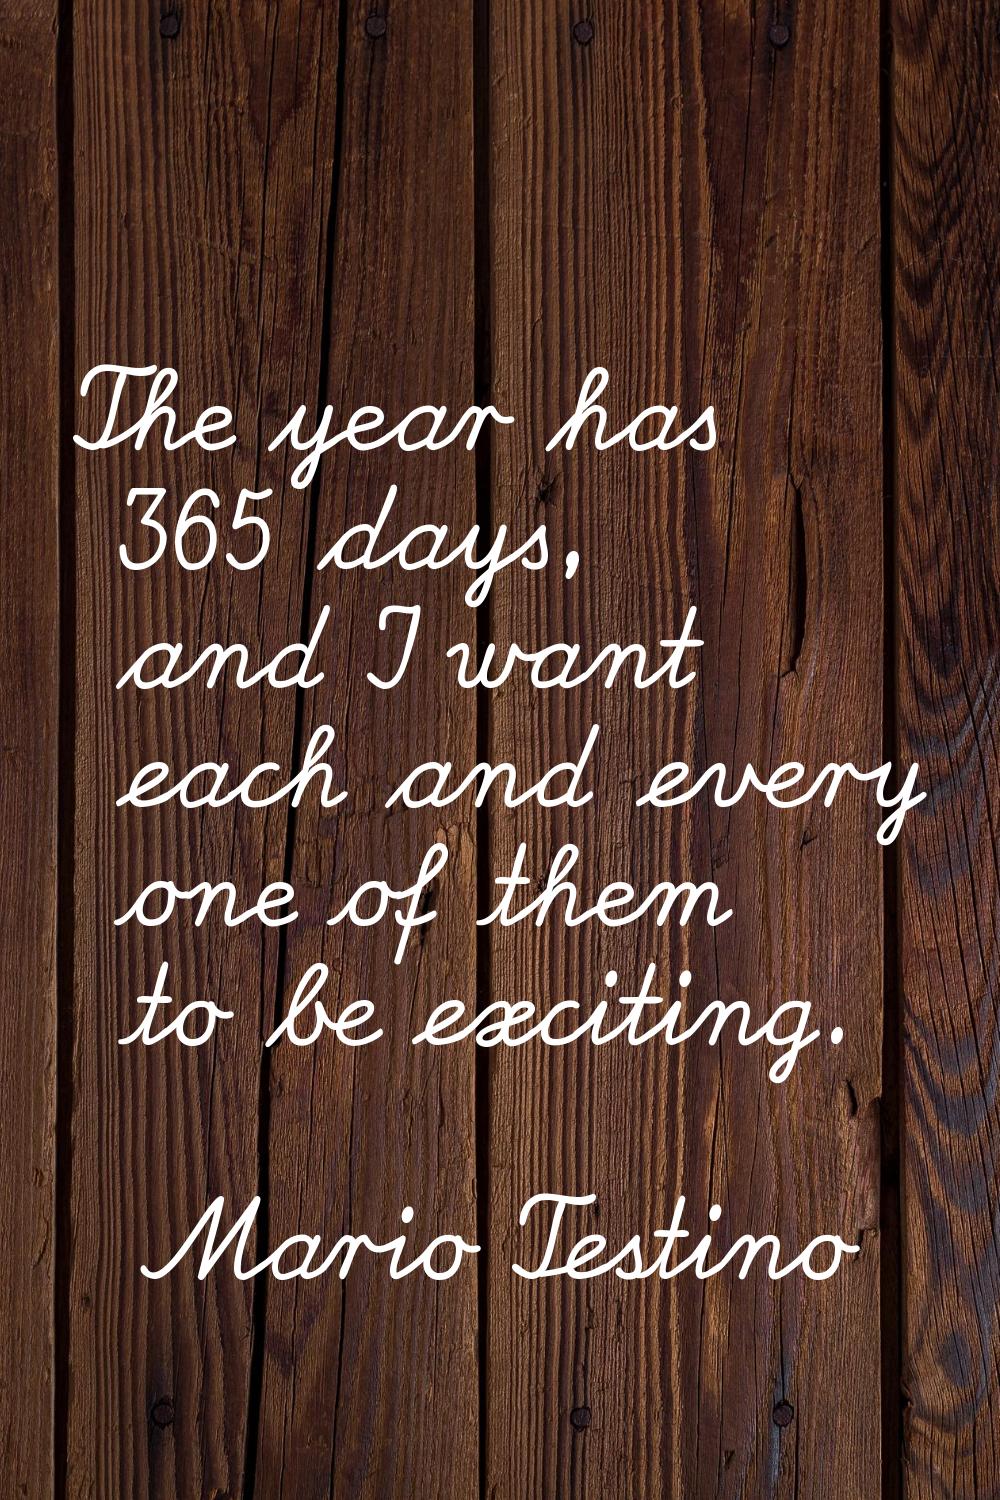 The year has 365 days, and I want each and every one of them to be exciting.